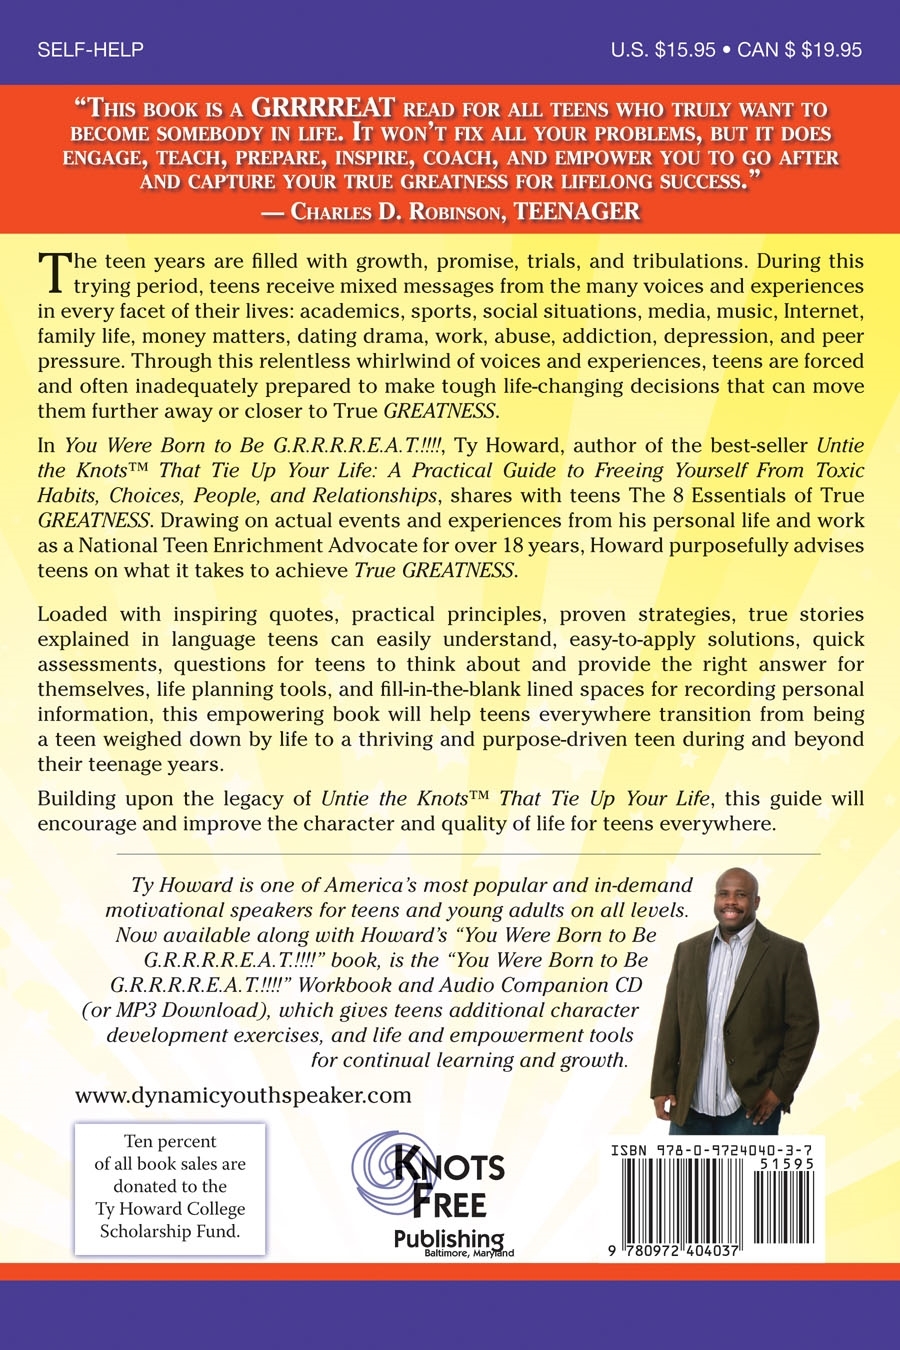 Ty Howard's You Were Born to Be G.R.R.R.R.E.A.T.!!! - Empowerment & Character Enrichment Guide for Teens